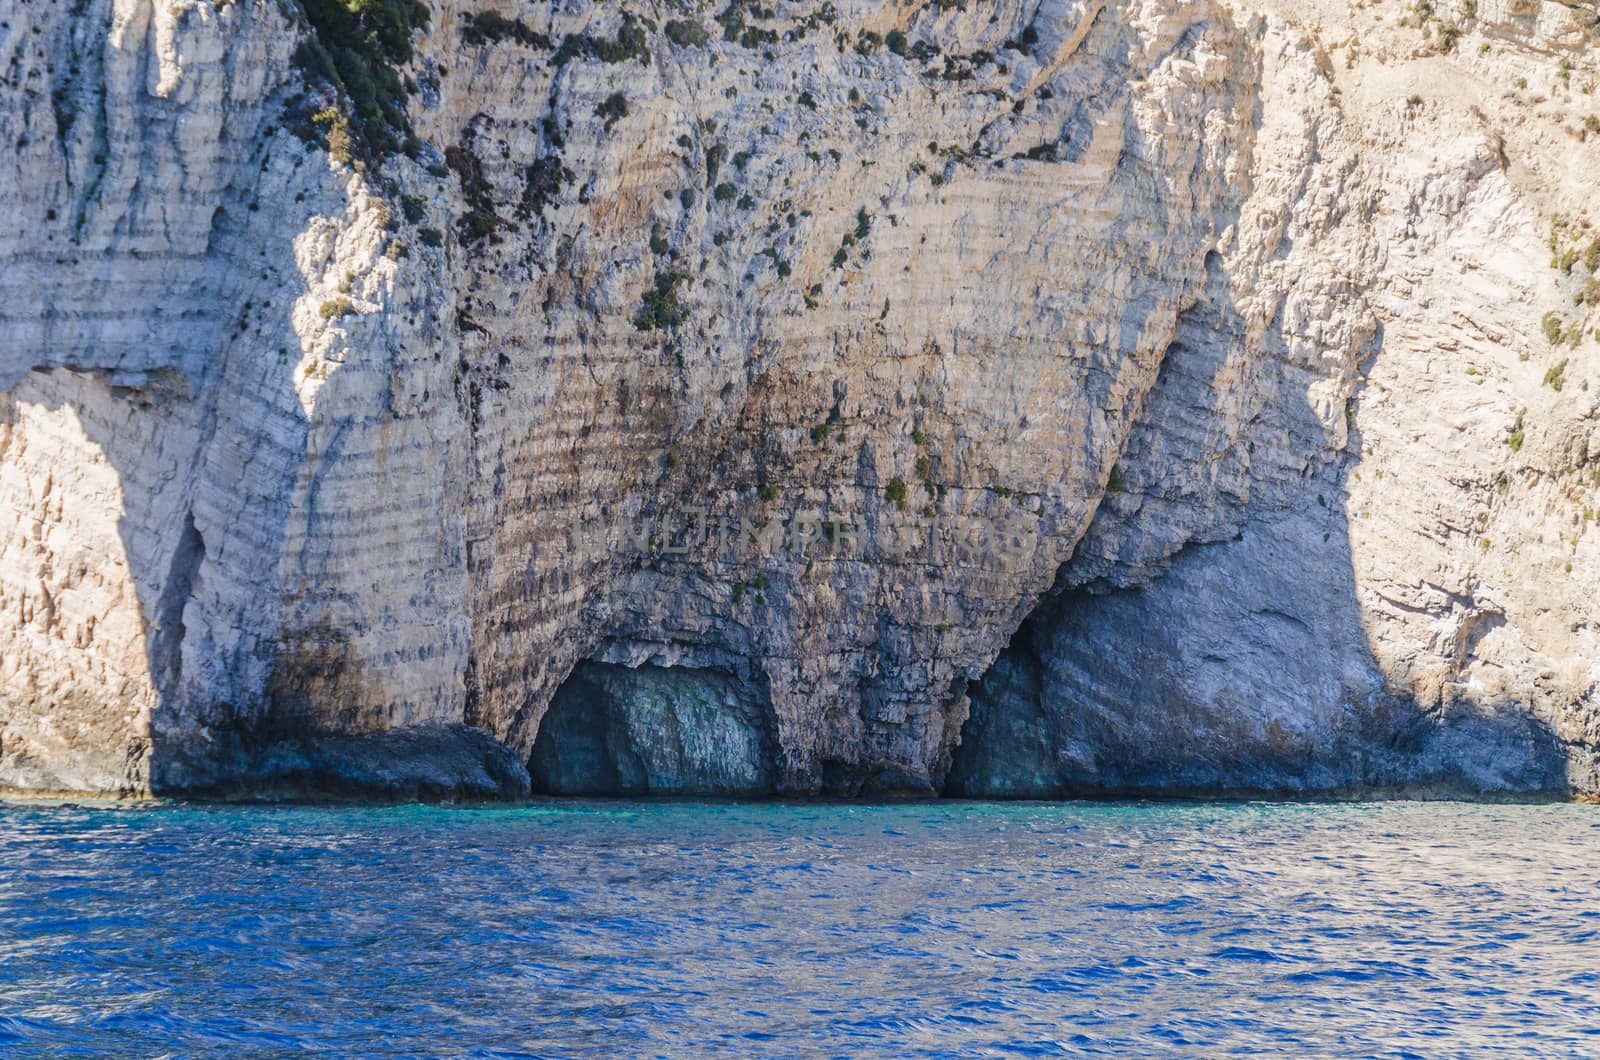 two blue caves on the shores of the island of Zakynthos in the Ionian Sea